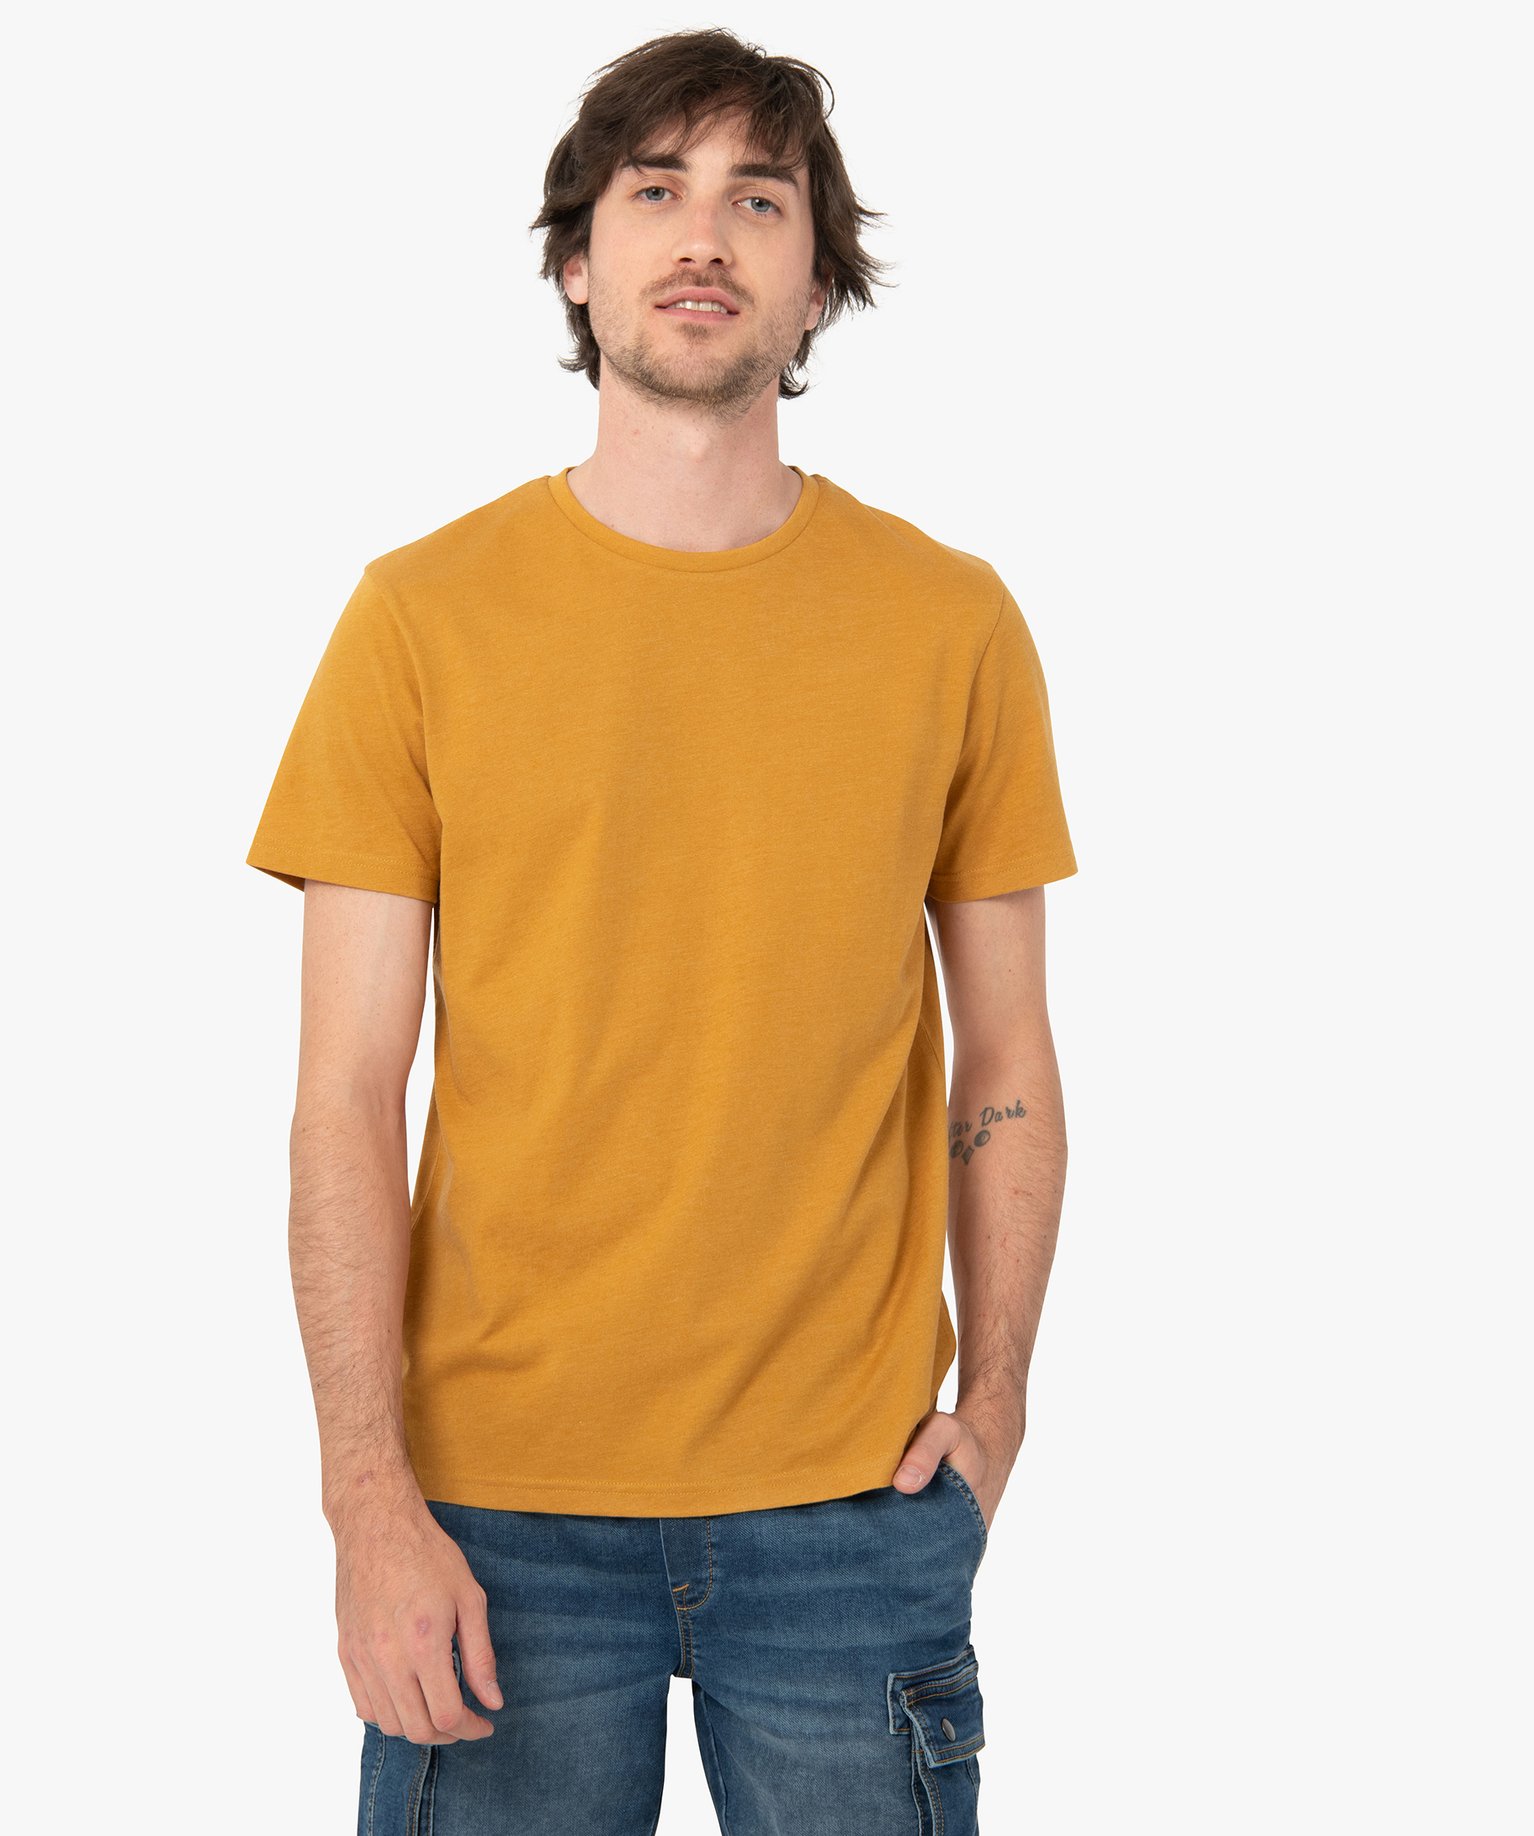 tee-shirt homme a manches courtes et col rond jaune tee-shirts